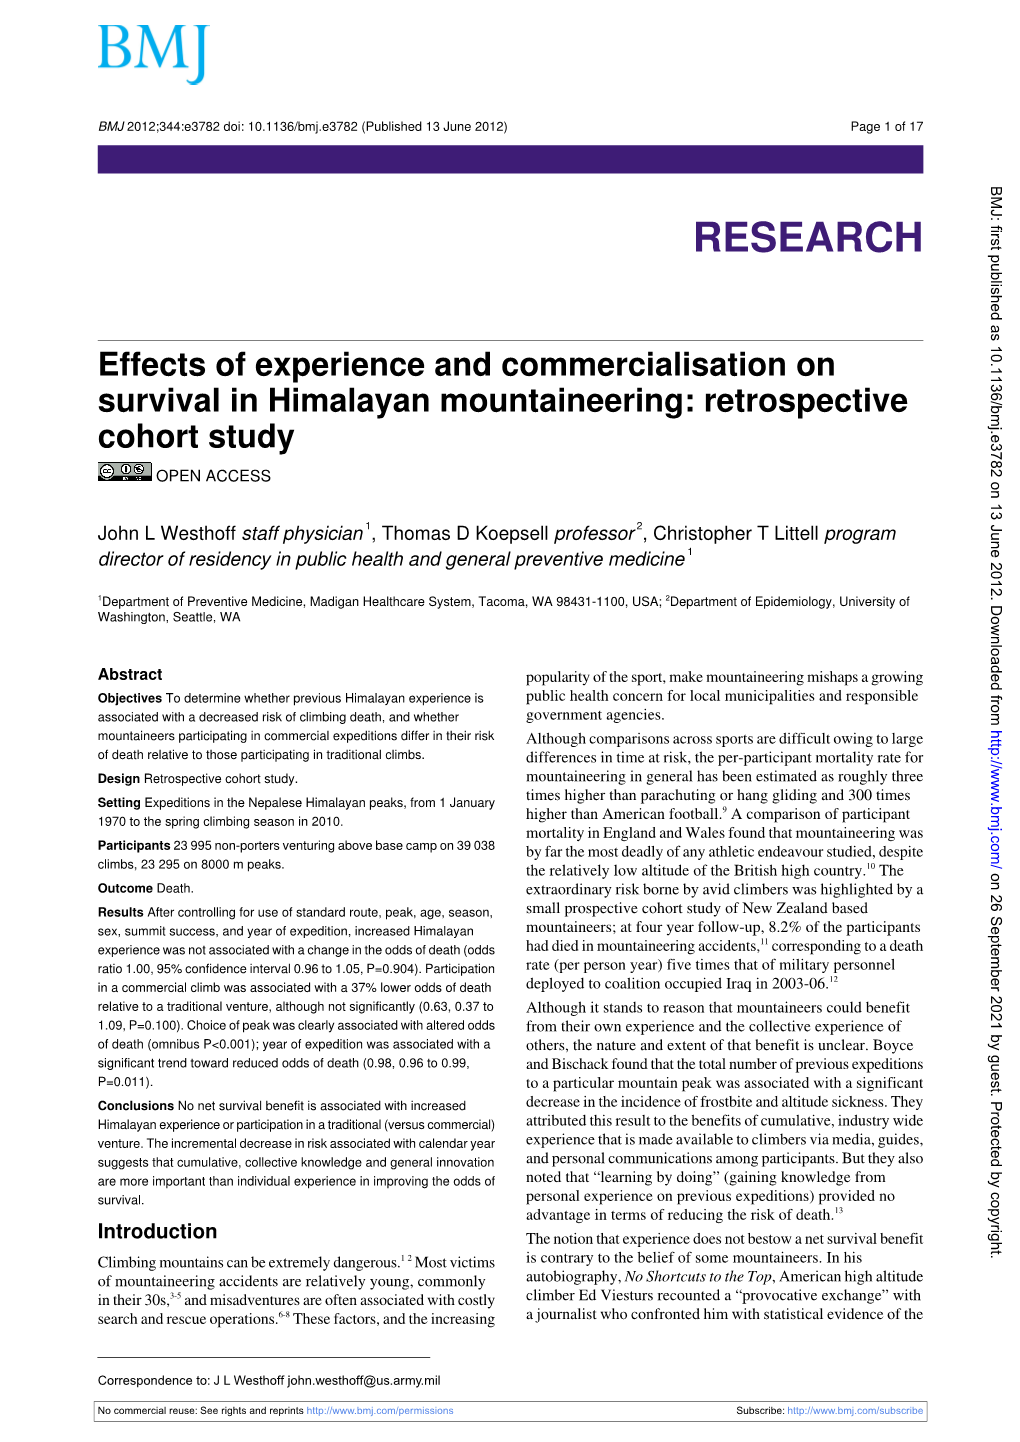 Effects of Experience and Commercialisation on Survival in Himalayan Mountaineering: Retrospective Cohort Study OPEN ACCESS